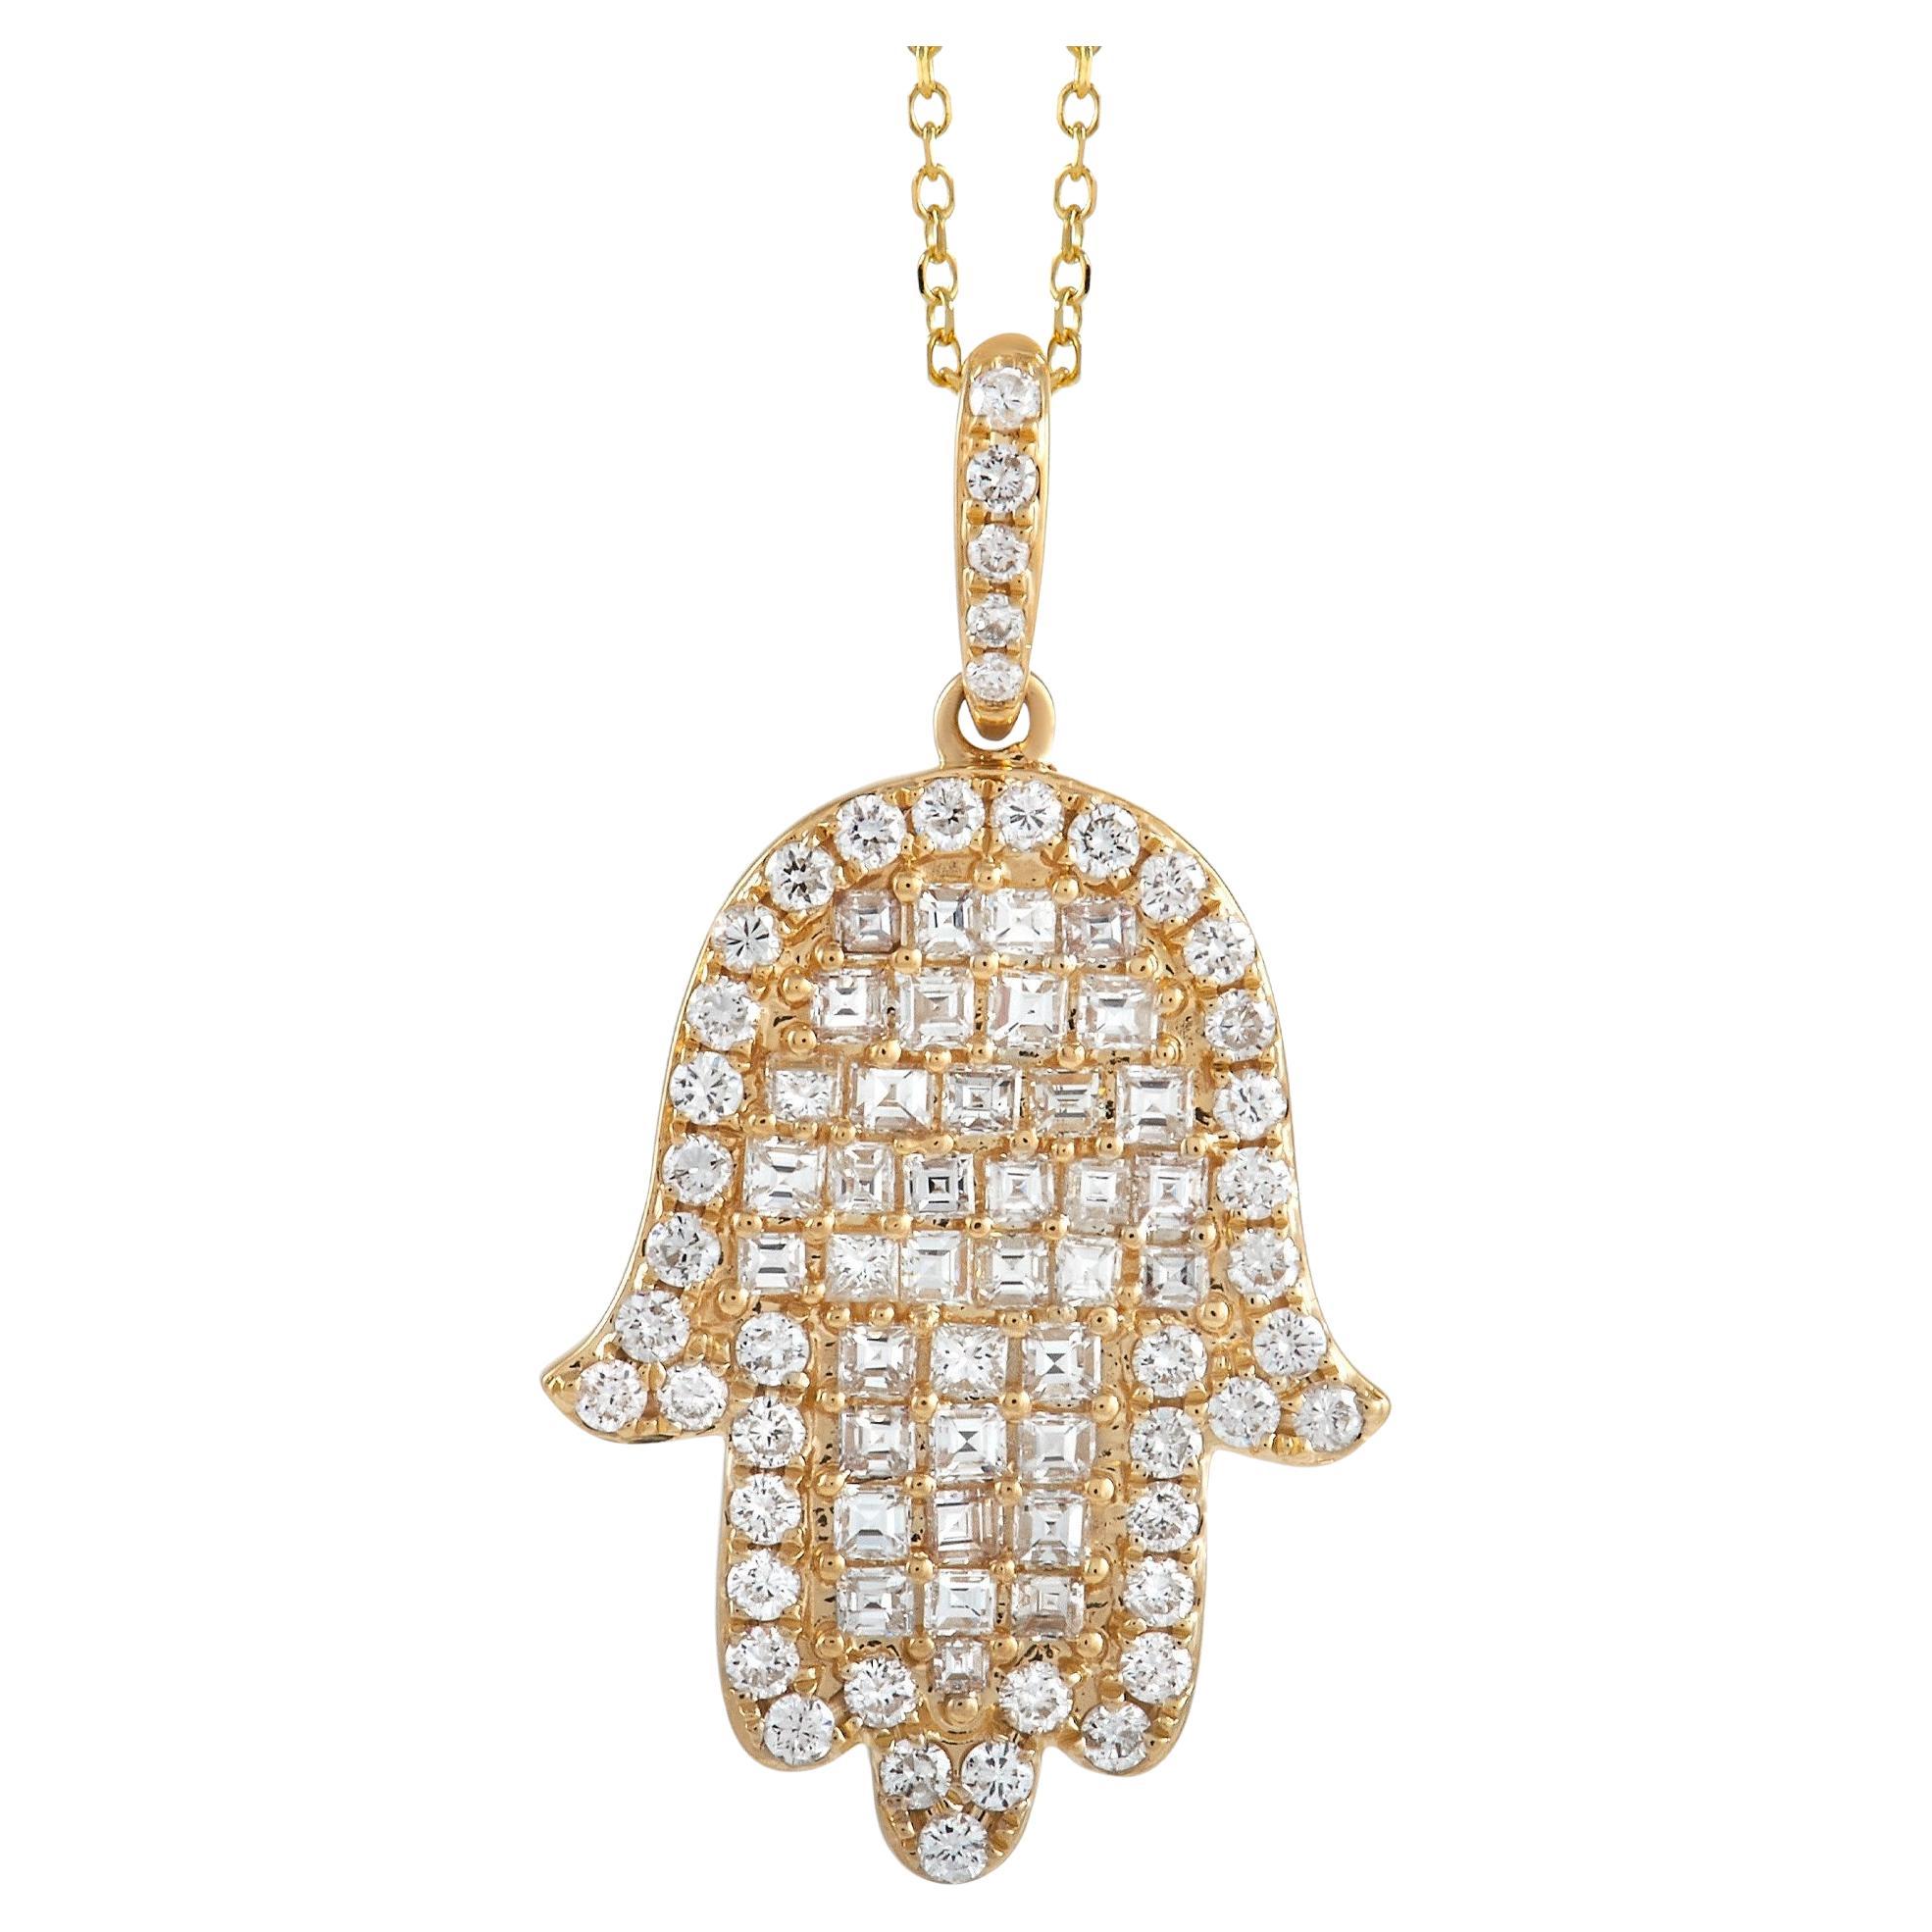 LB Exclusive 18K Yellow Gold 1.23 Ct Diamond Hamsa Necklace For Sale